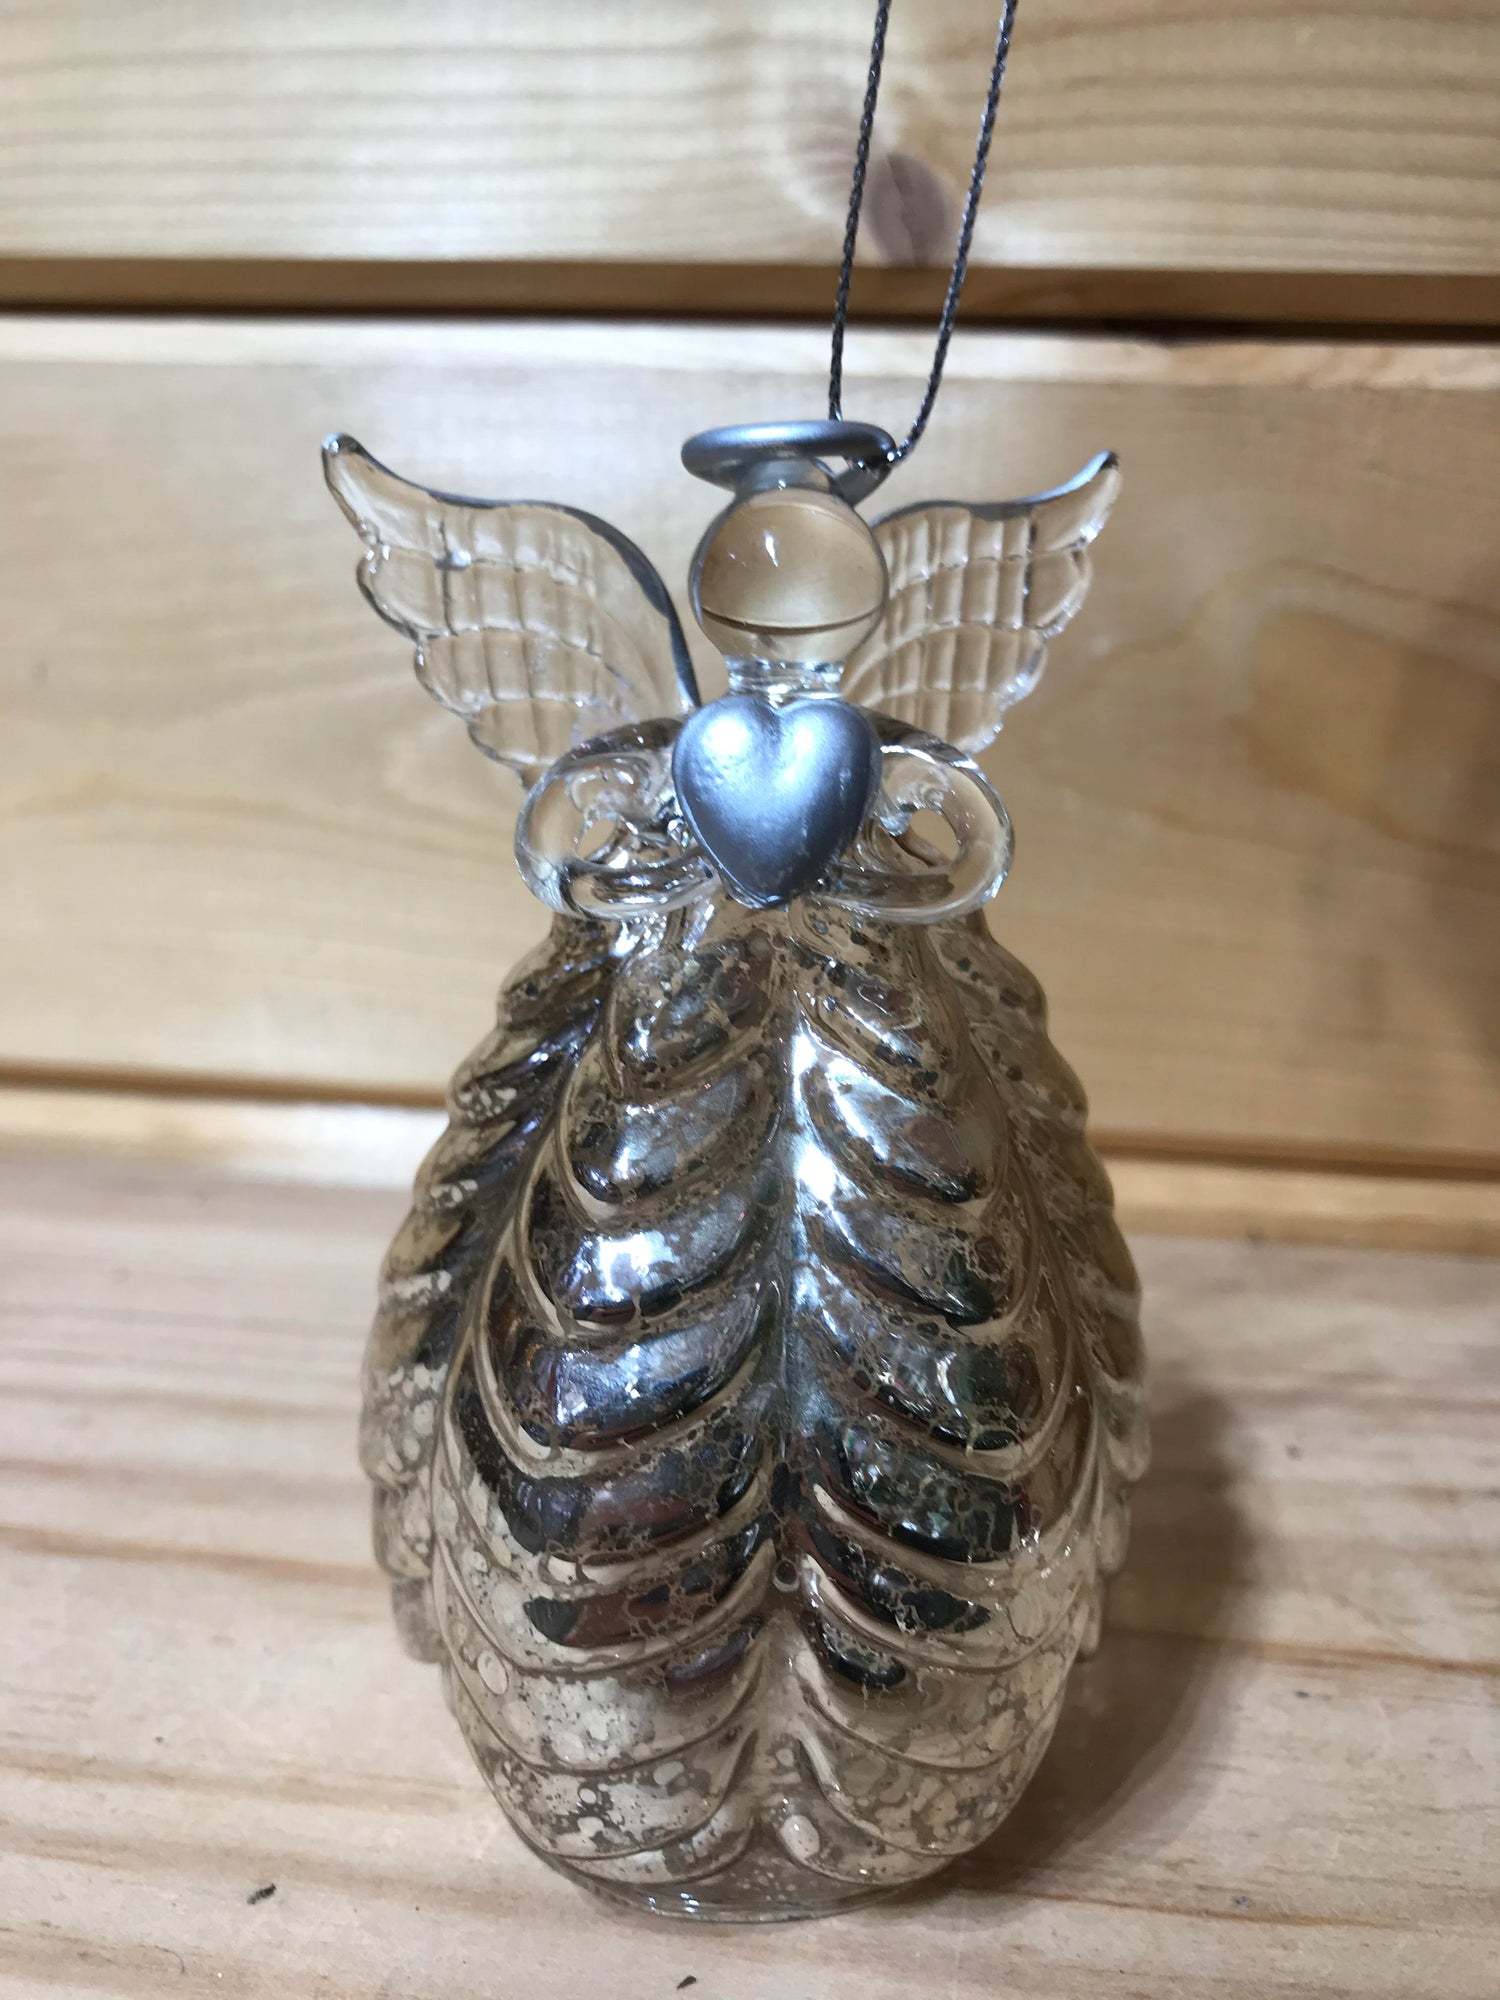 This stunning glass antique effect angel holding a heart, with a ridged ballon skirt, will be the perfect finishing touch to your Christmas tree!